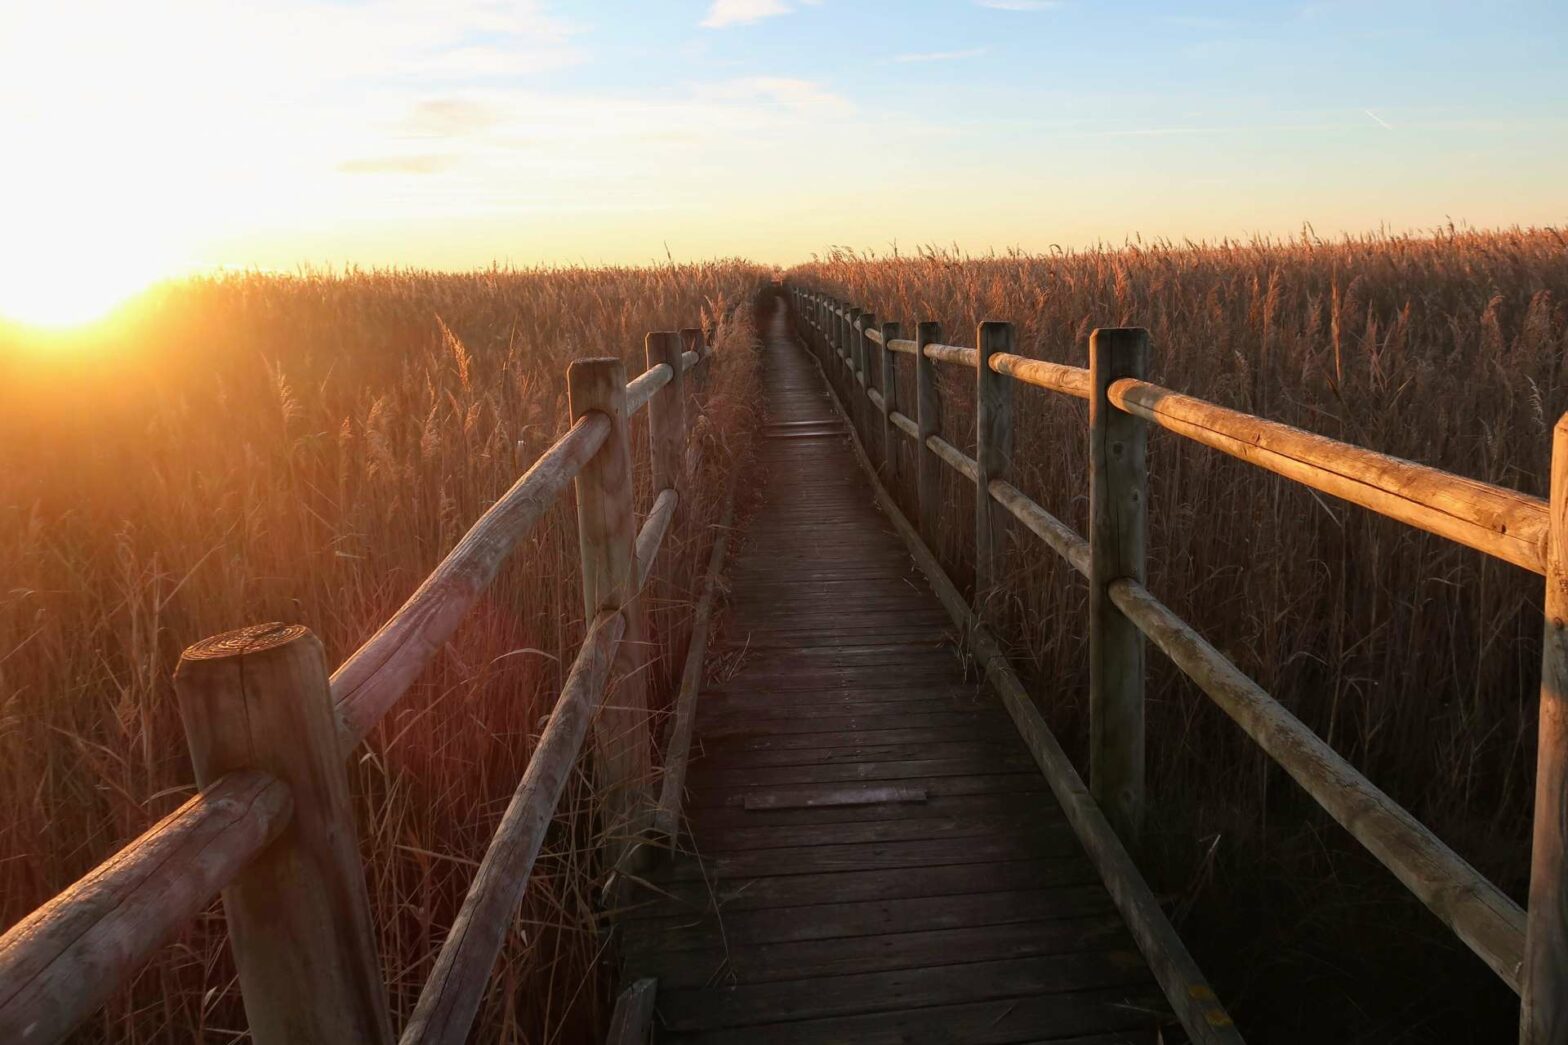 Boardwalk and reeds in the Camargue, southern France